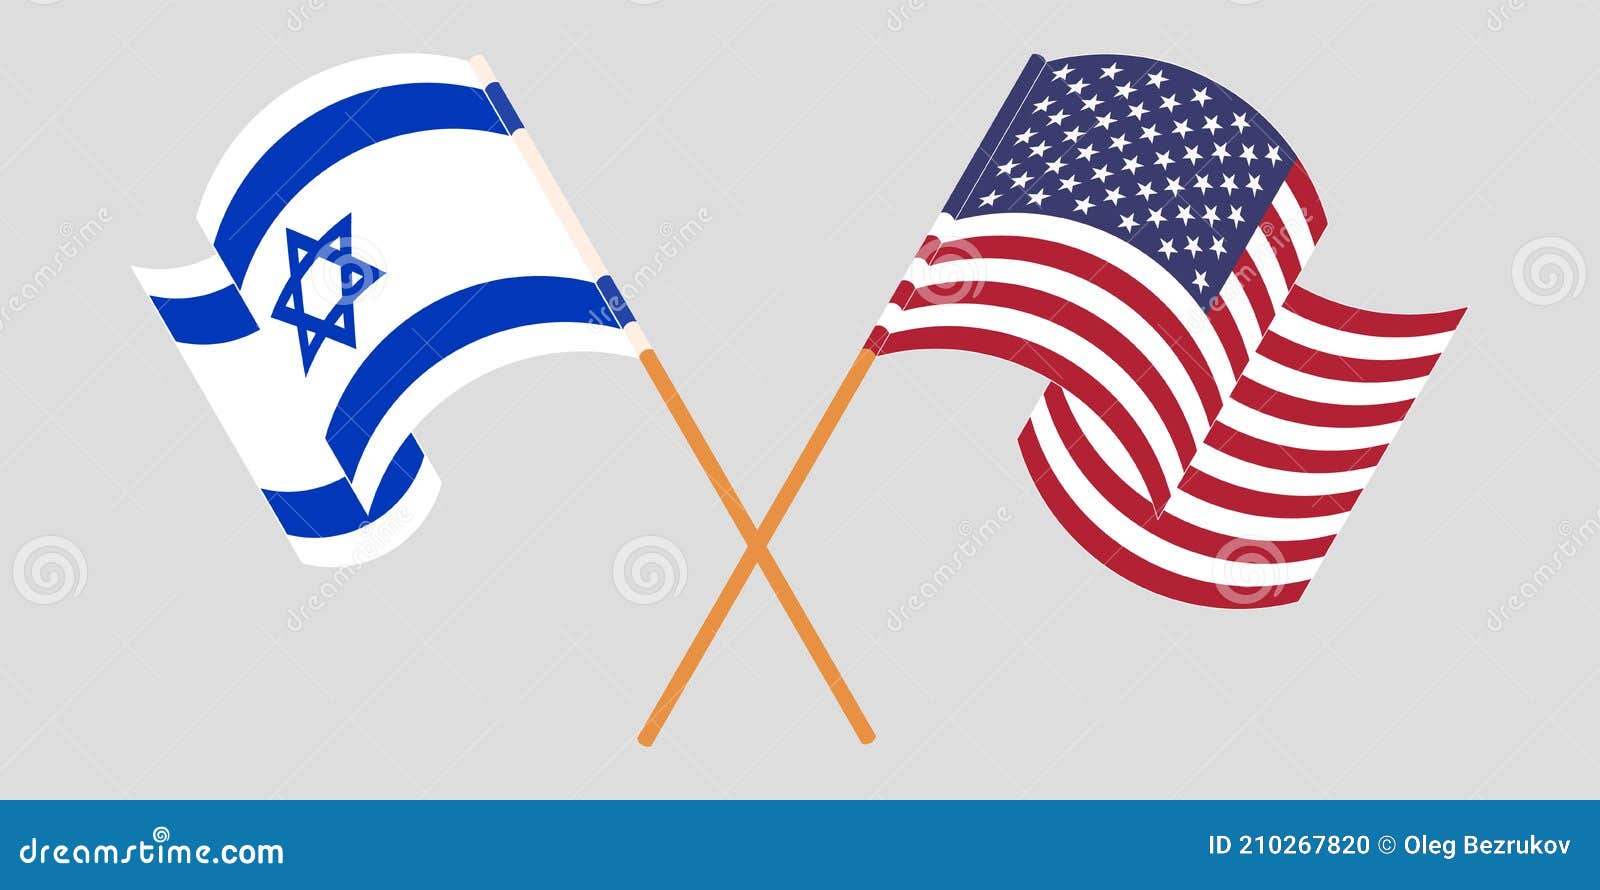 crossed and waving flags of israel and the usa